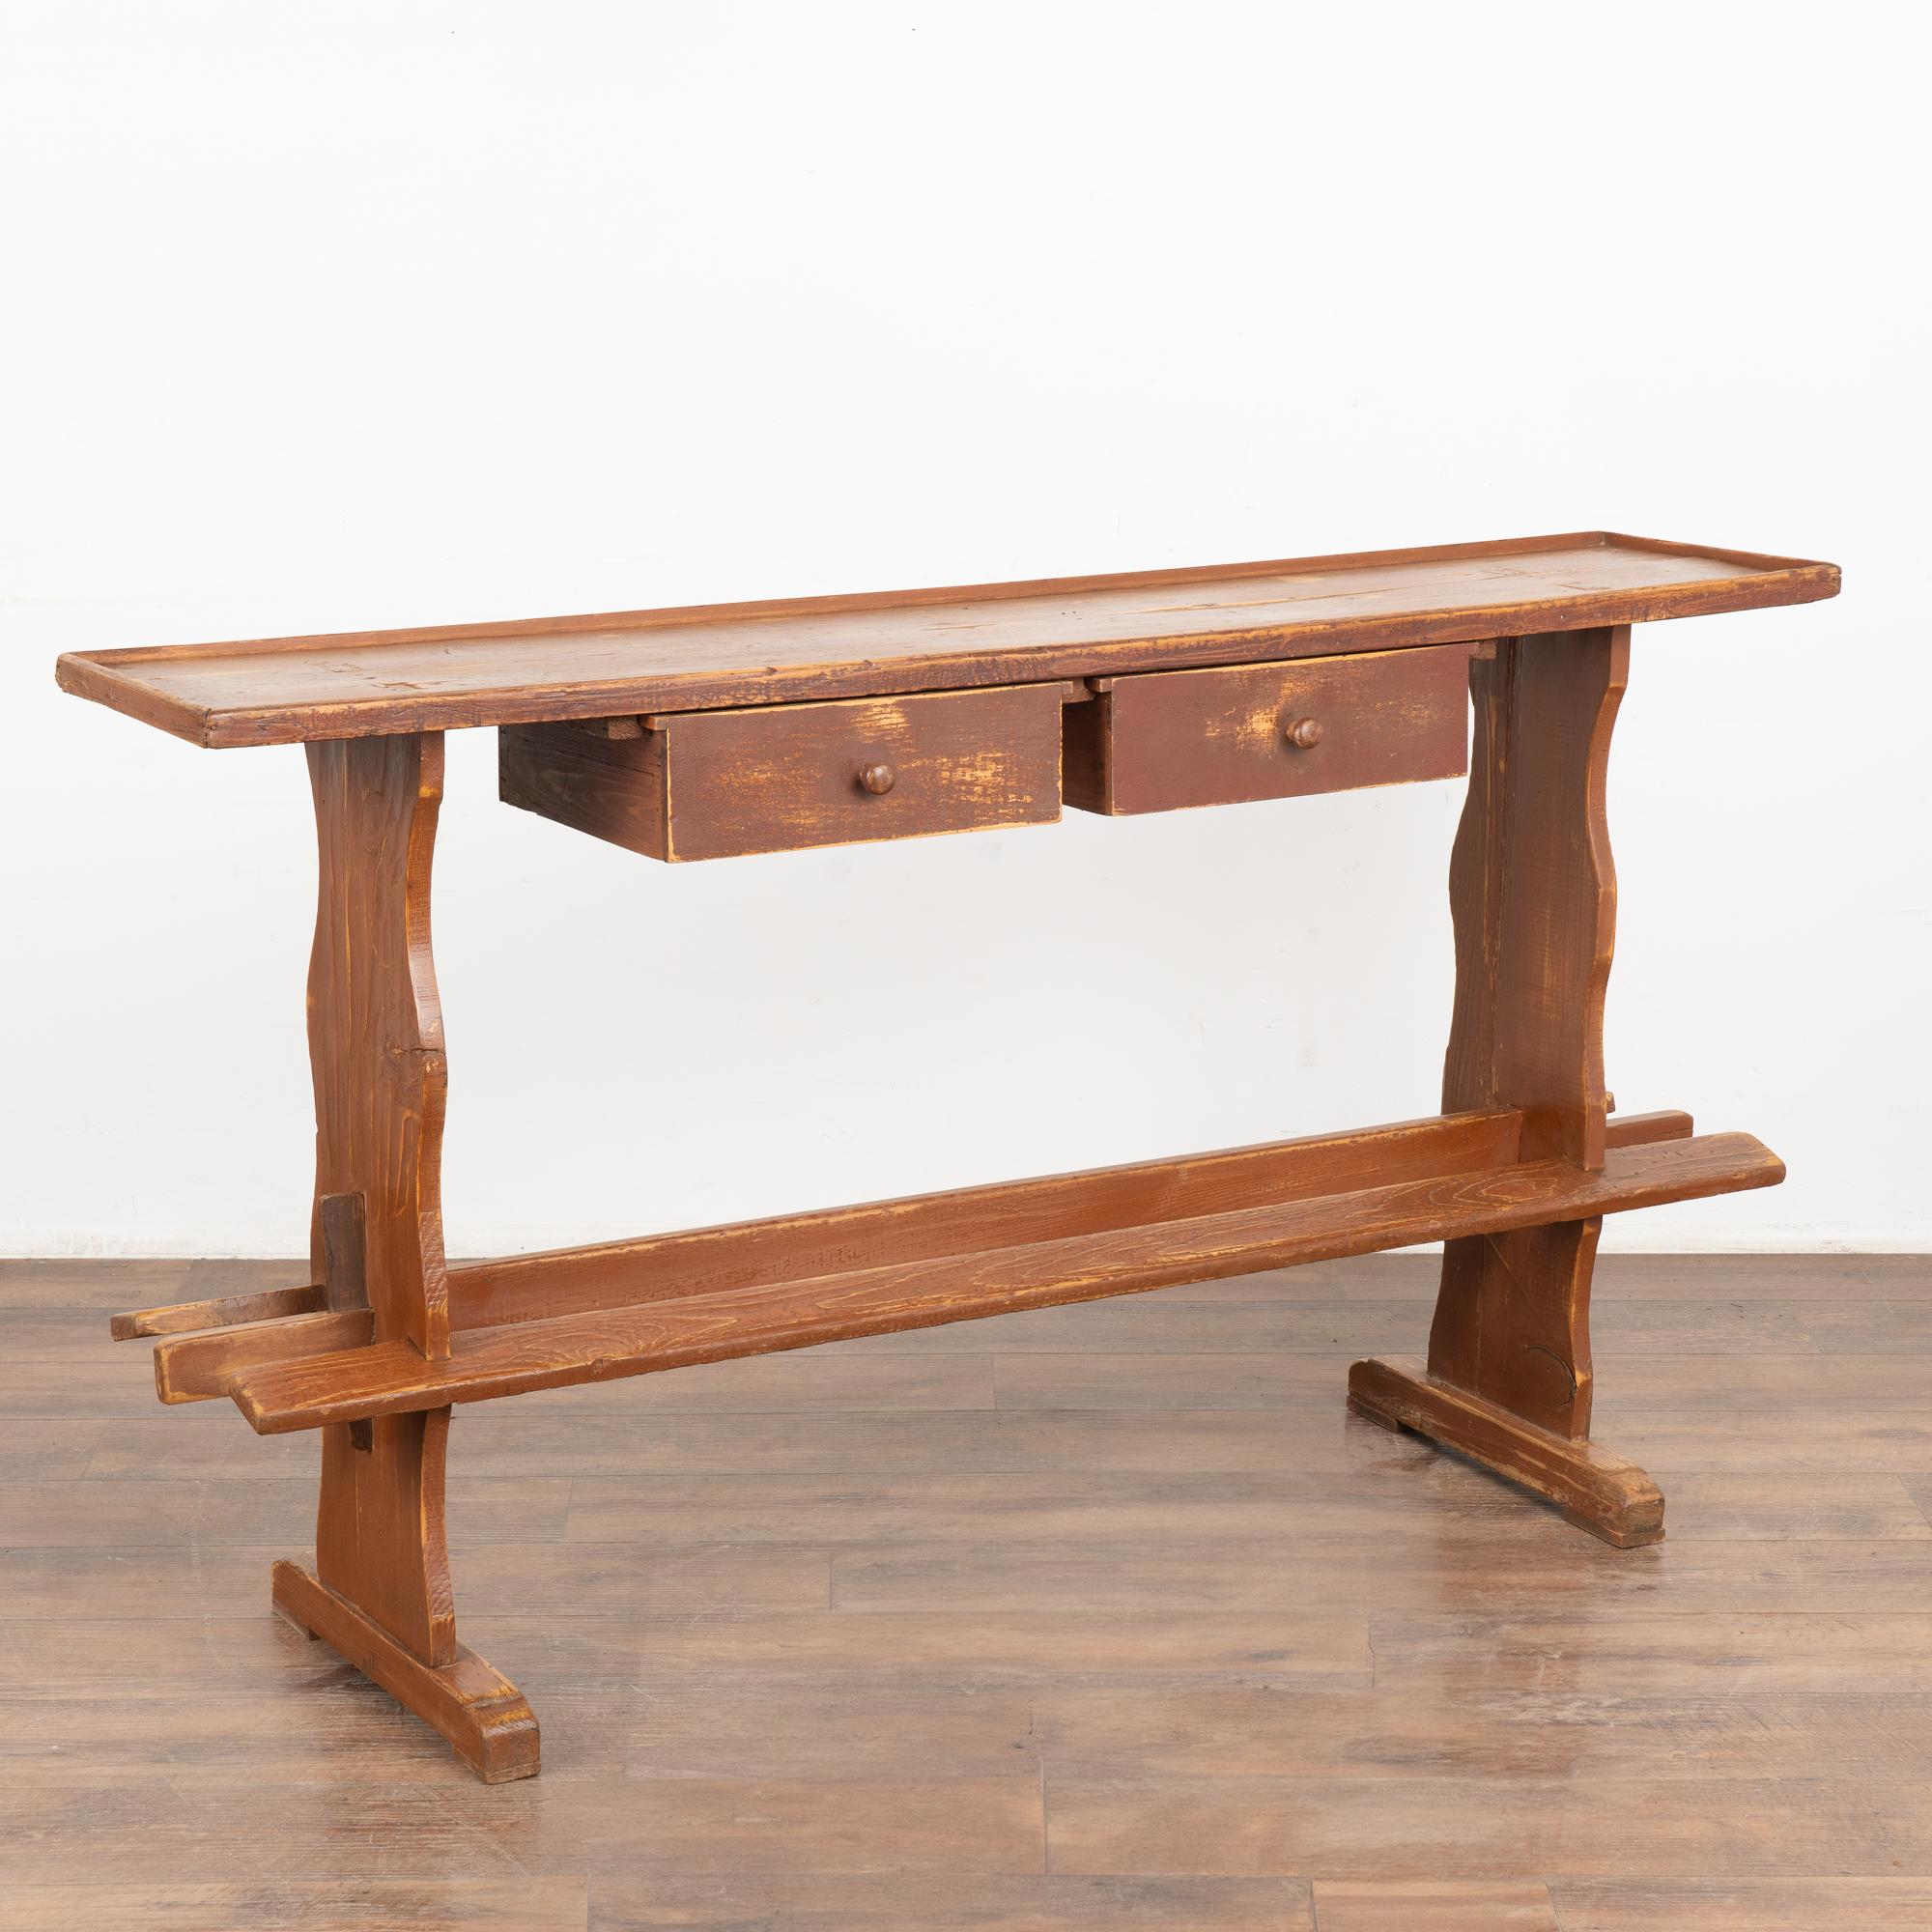 This narrow console table is both unique and charming, thanks to the gently distressed original brown paint, two drawers and trestle base adding to its rustic country appeal.
Note there is a trim or edge around the top.
This table has been restored,